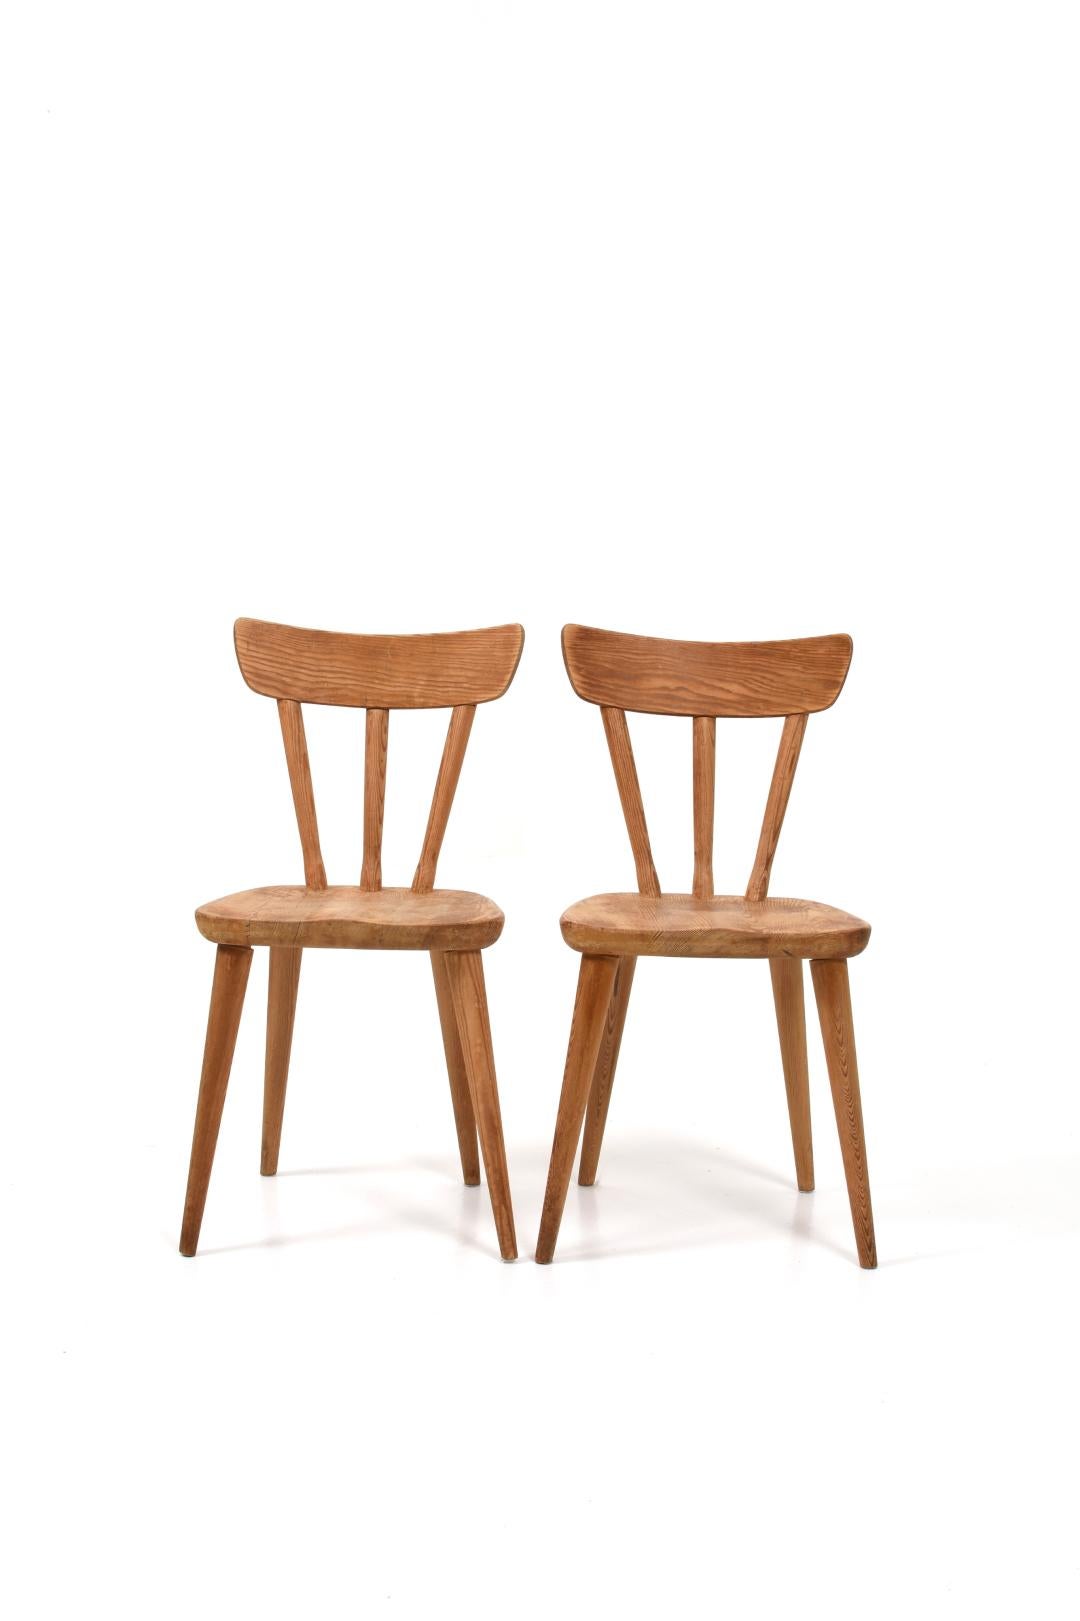 Set of 4 chairs by Göran Malmvall Svensk Fur, Sweden. 
The chairs are made in solid pine around.
